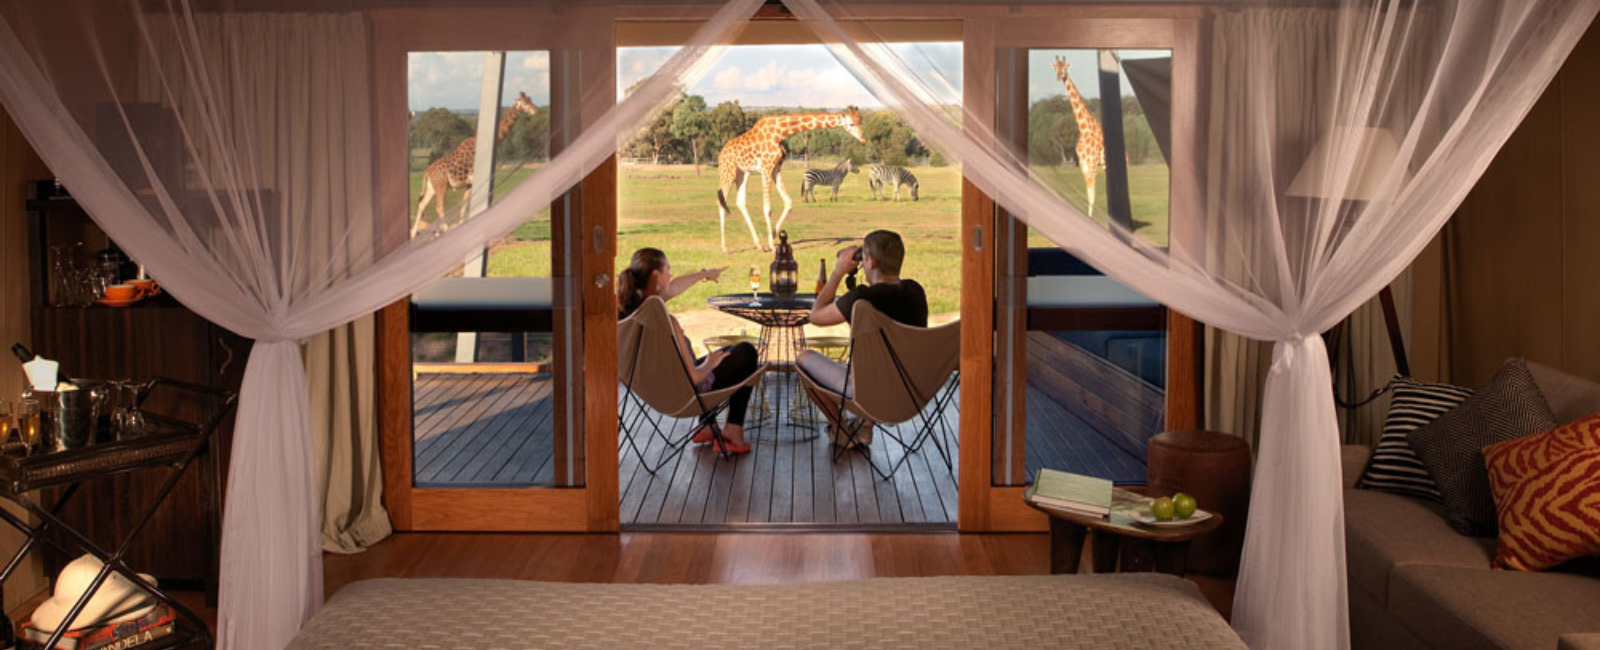 Two people looking at giraffes from the Zoofari Lodge